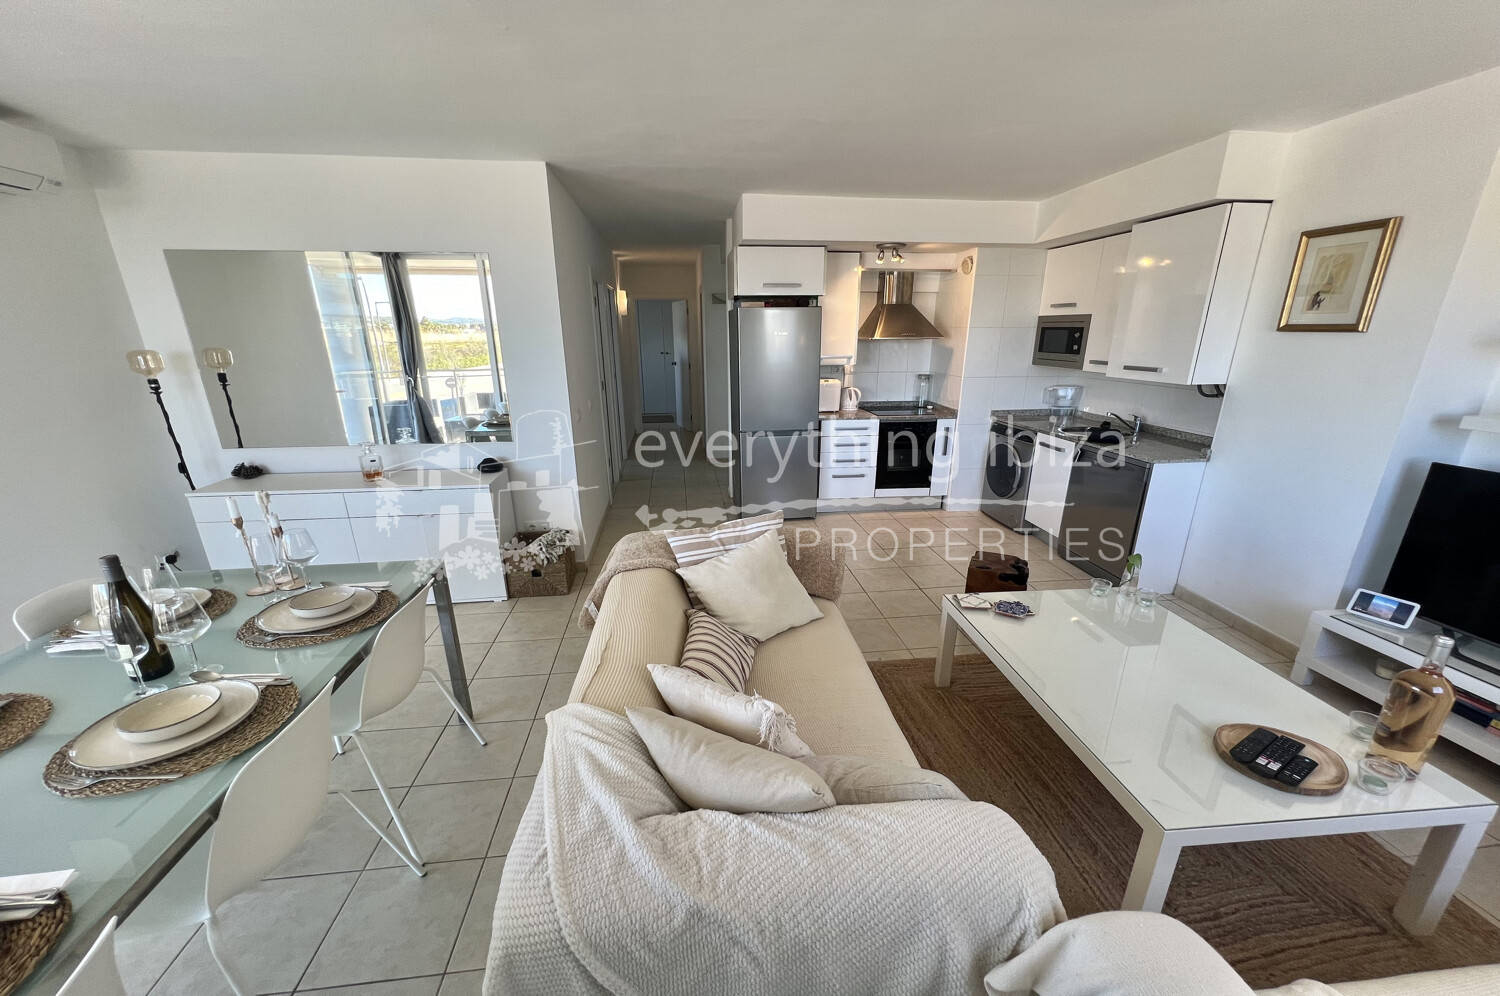 Stylish Modern 3 Bedroom Apartment Close to the Beach & Prestigious Marinas, ref. 1709, for sale in Ibiza by everything ibiza Properties